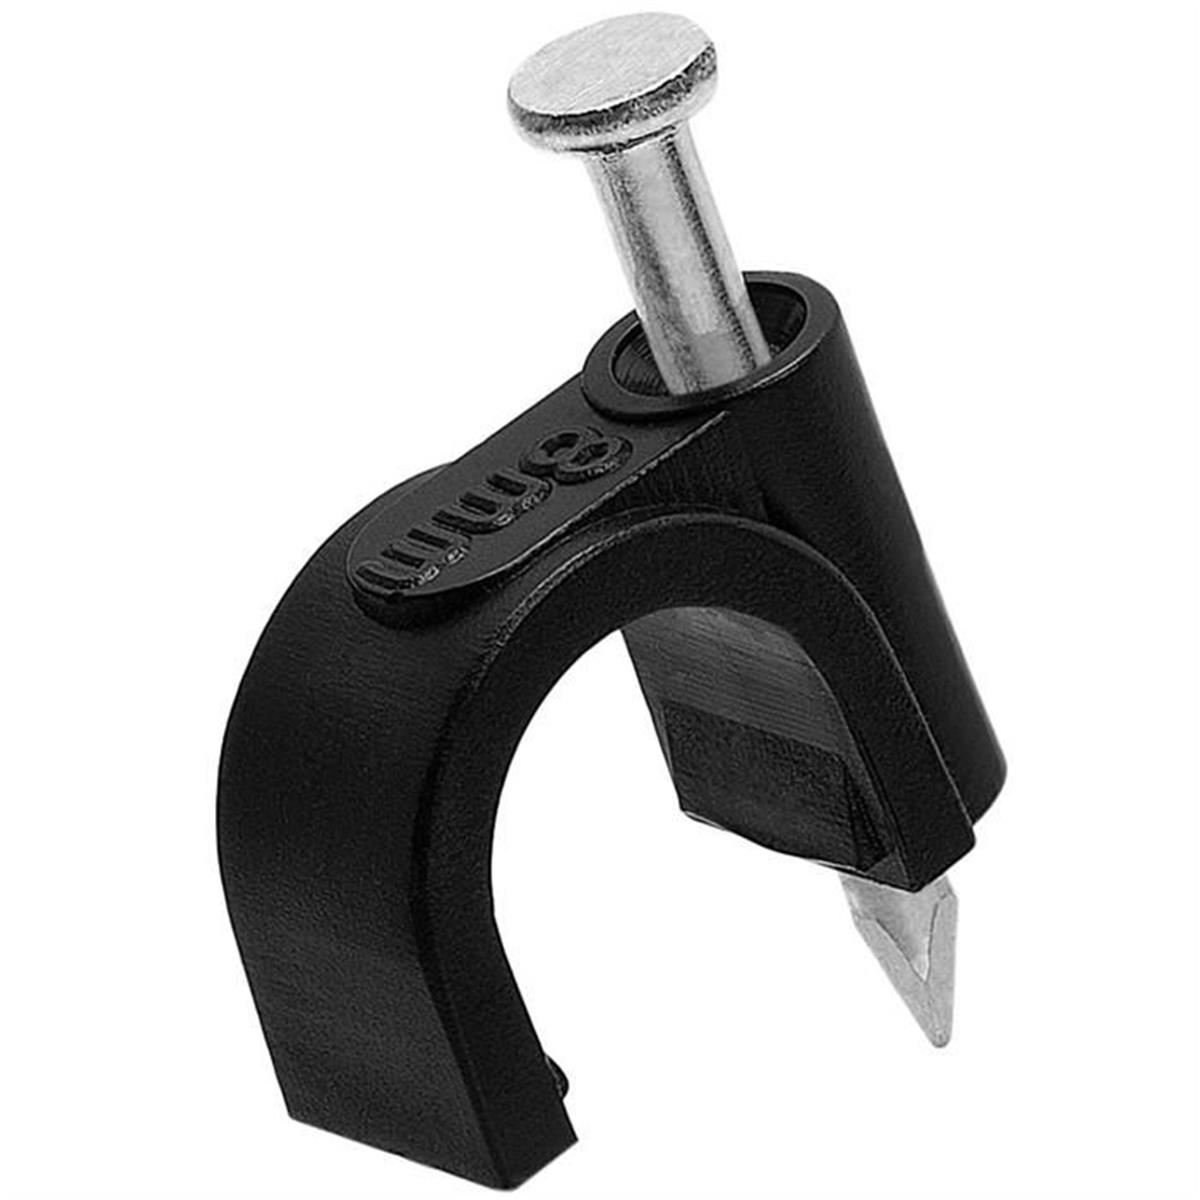 194-n Cable Clips For Rg6 8 Mm - Black - 100 Piece